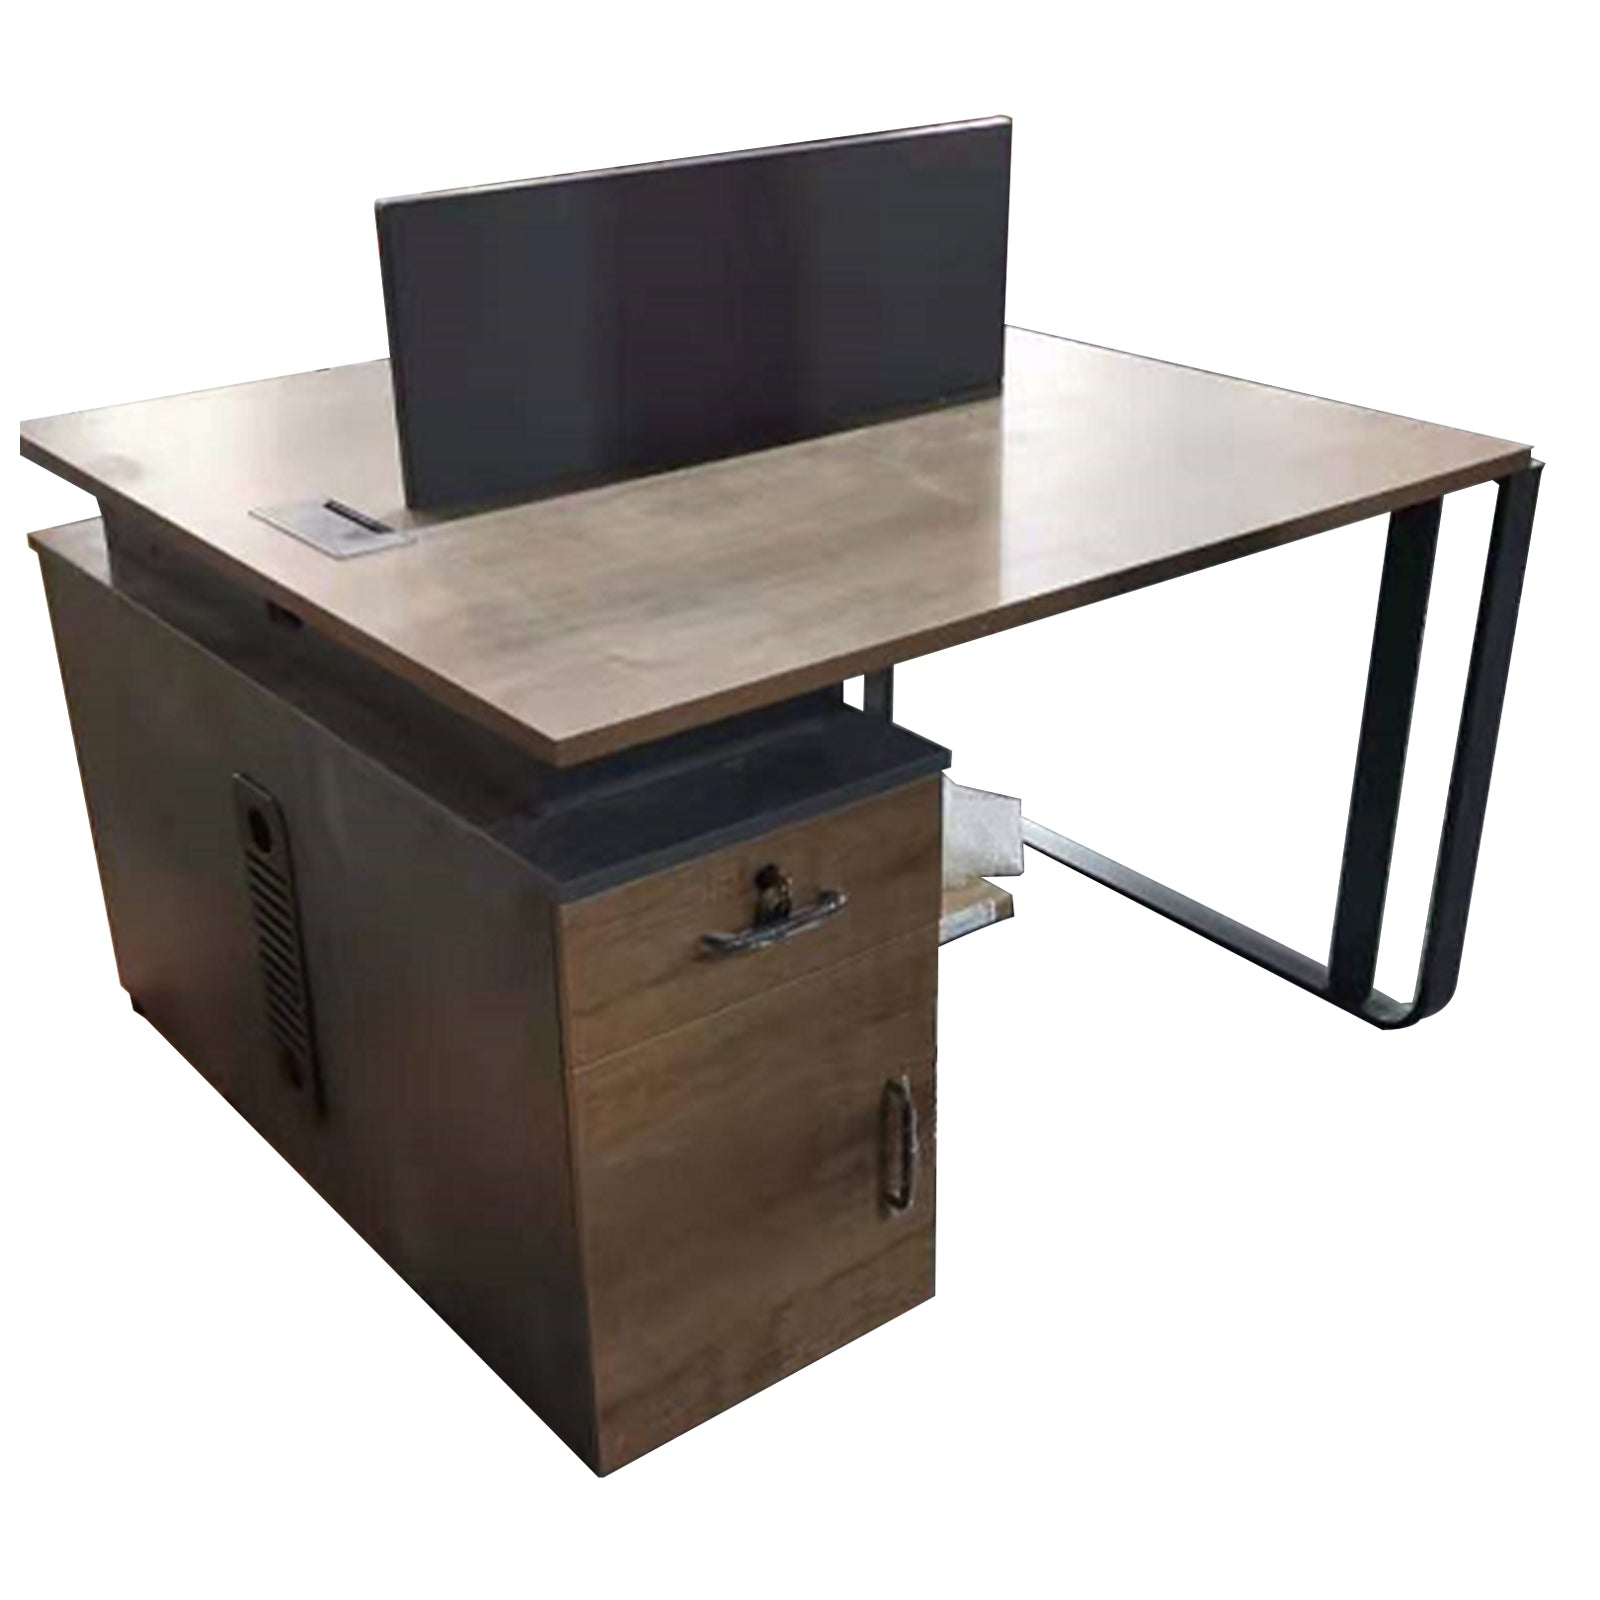 VOFFOV® 2 Person Face to Face Workstaion Desk w/ Cabinets